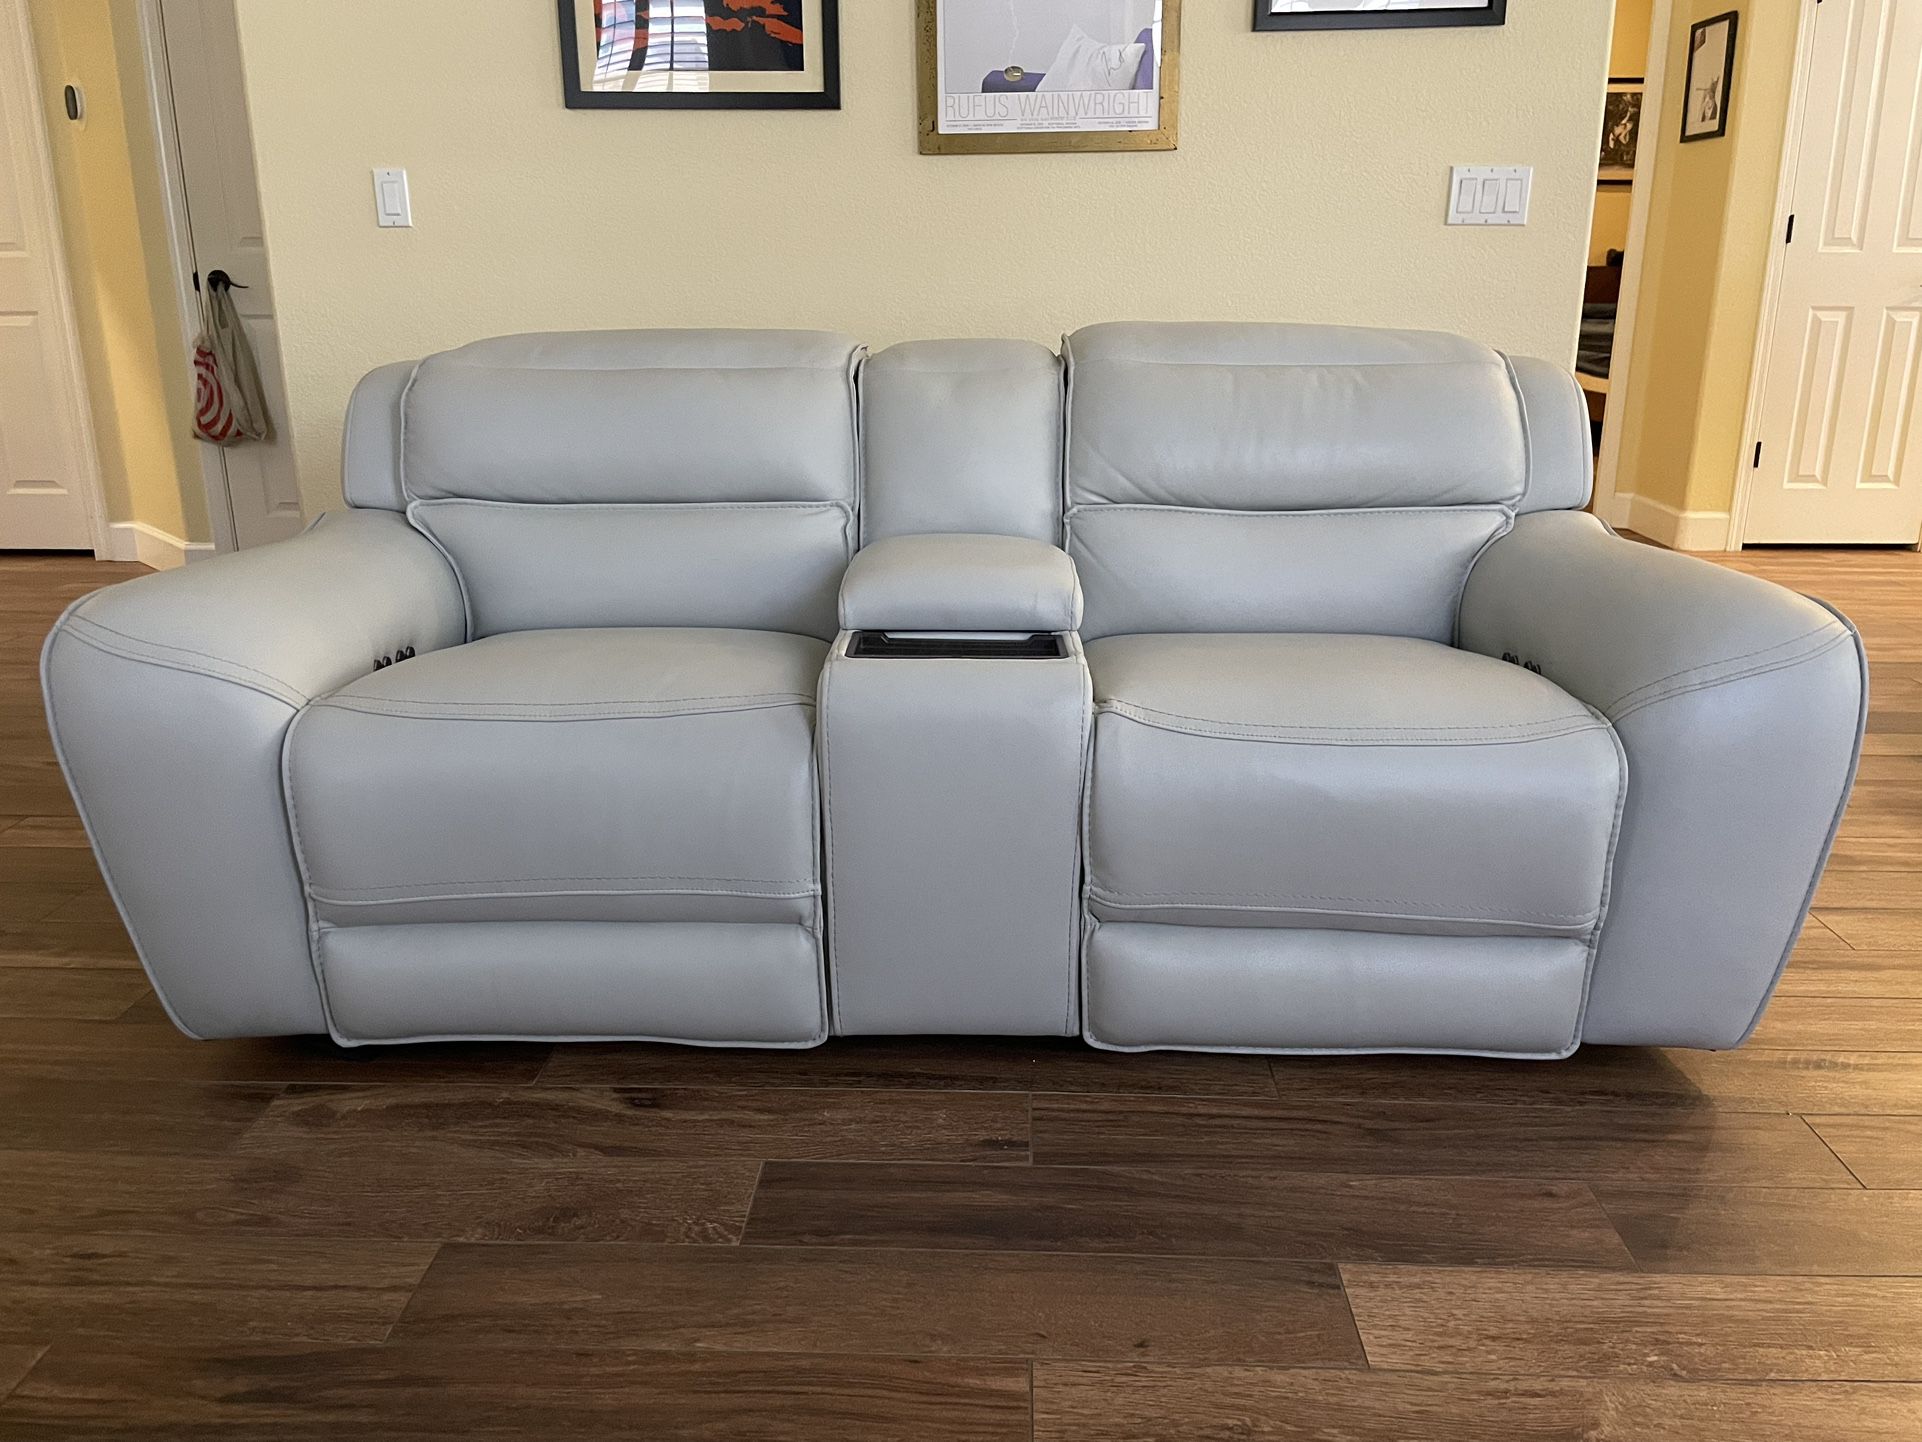 Italian Leather Loveseat - Power Recline, USB Ports And Wireless Charger